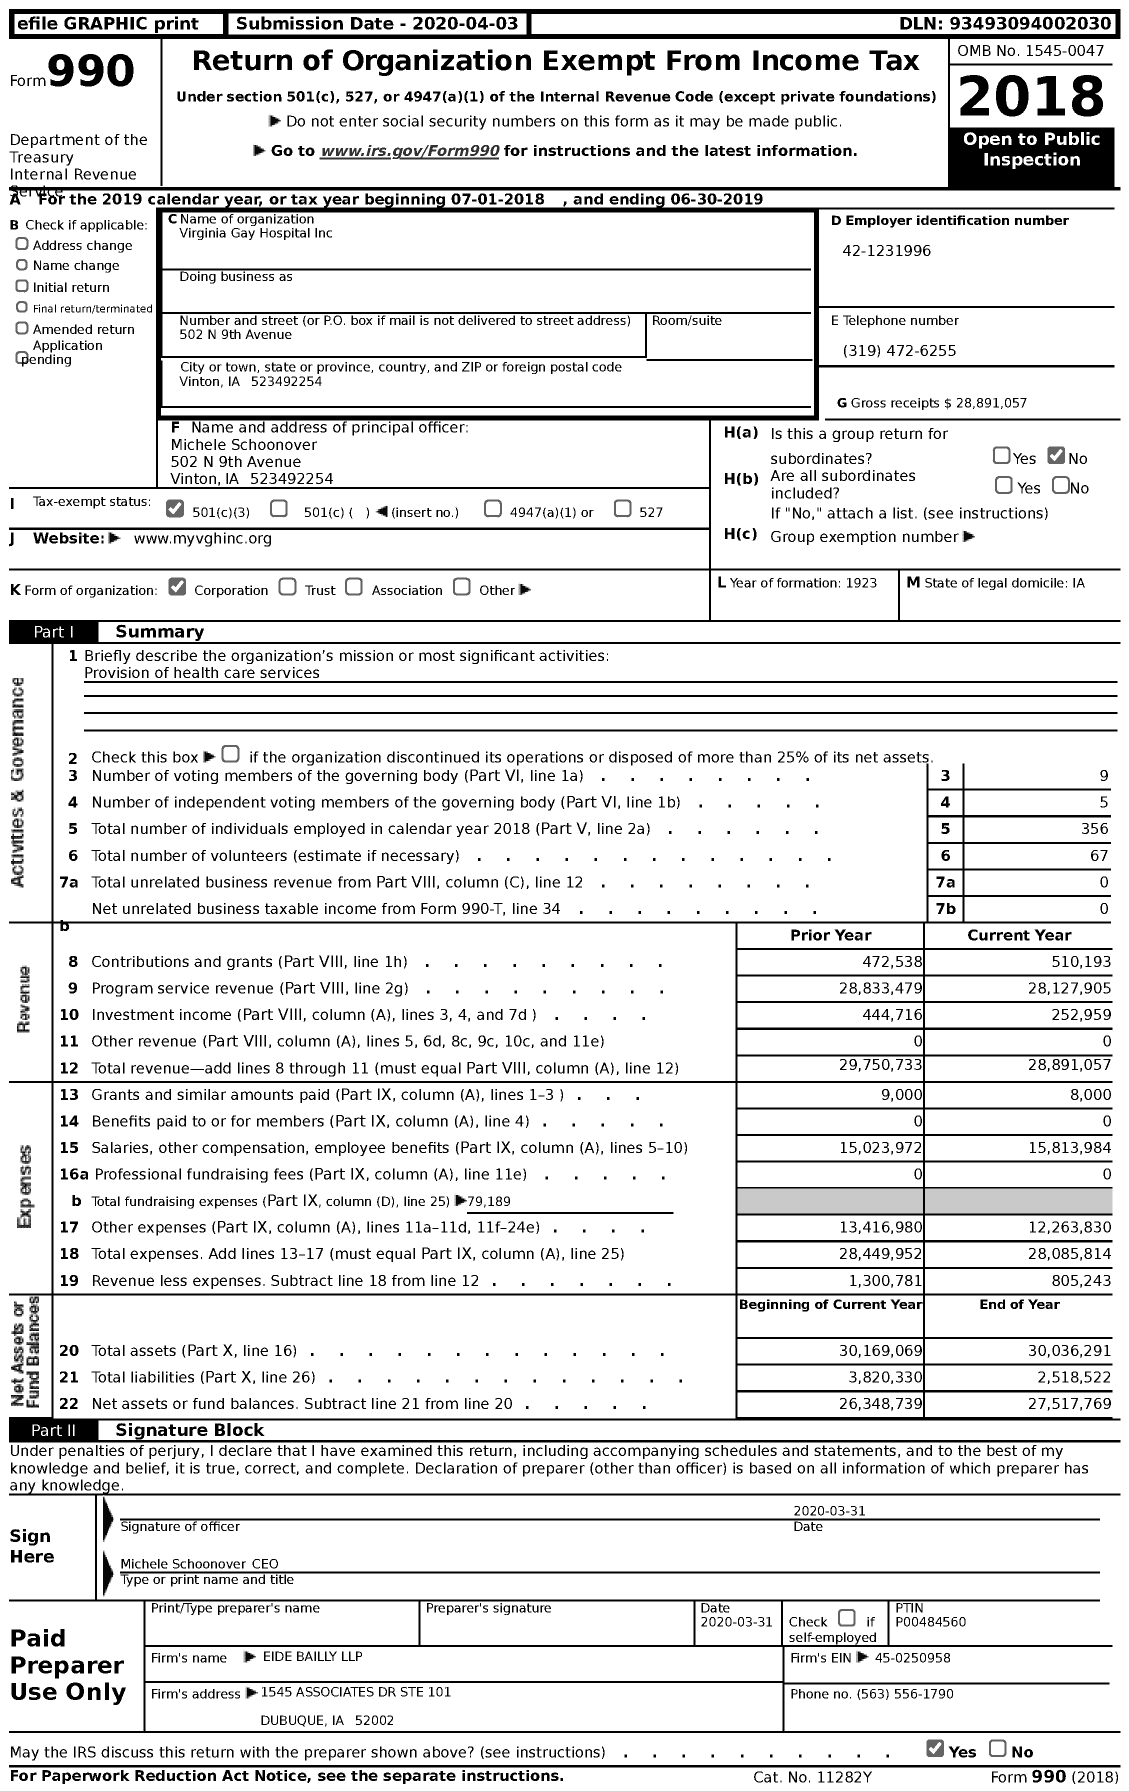 Image of first page of 2018 Form 990 for Virginia Gay Hospital (VGH)